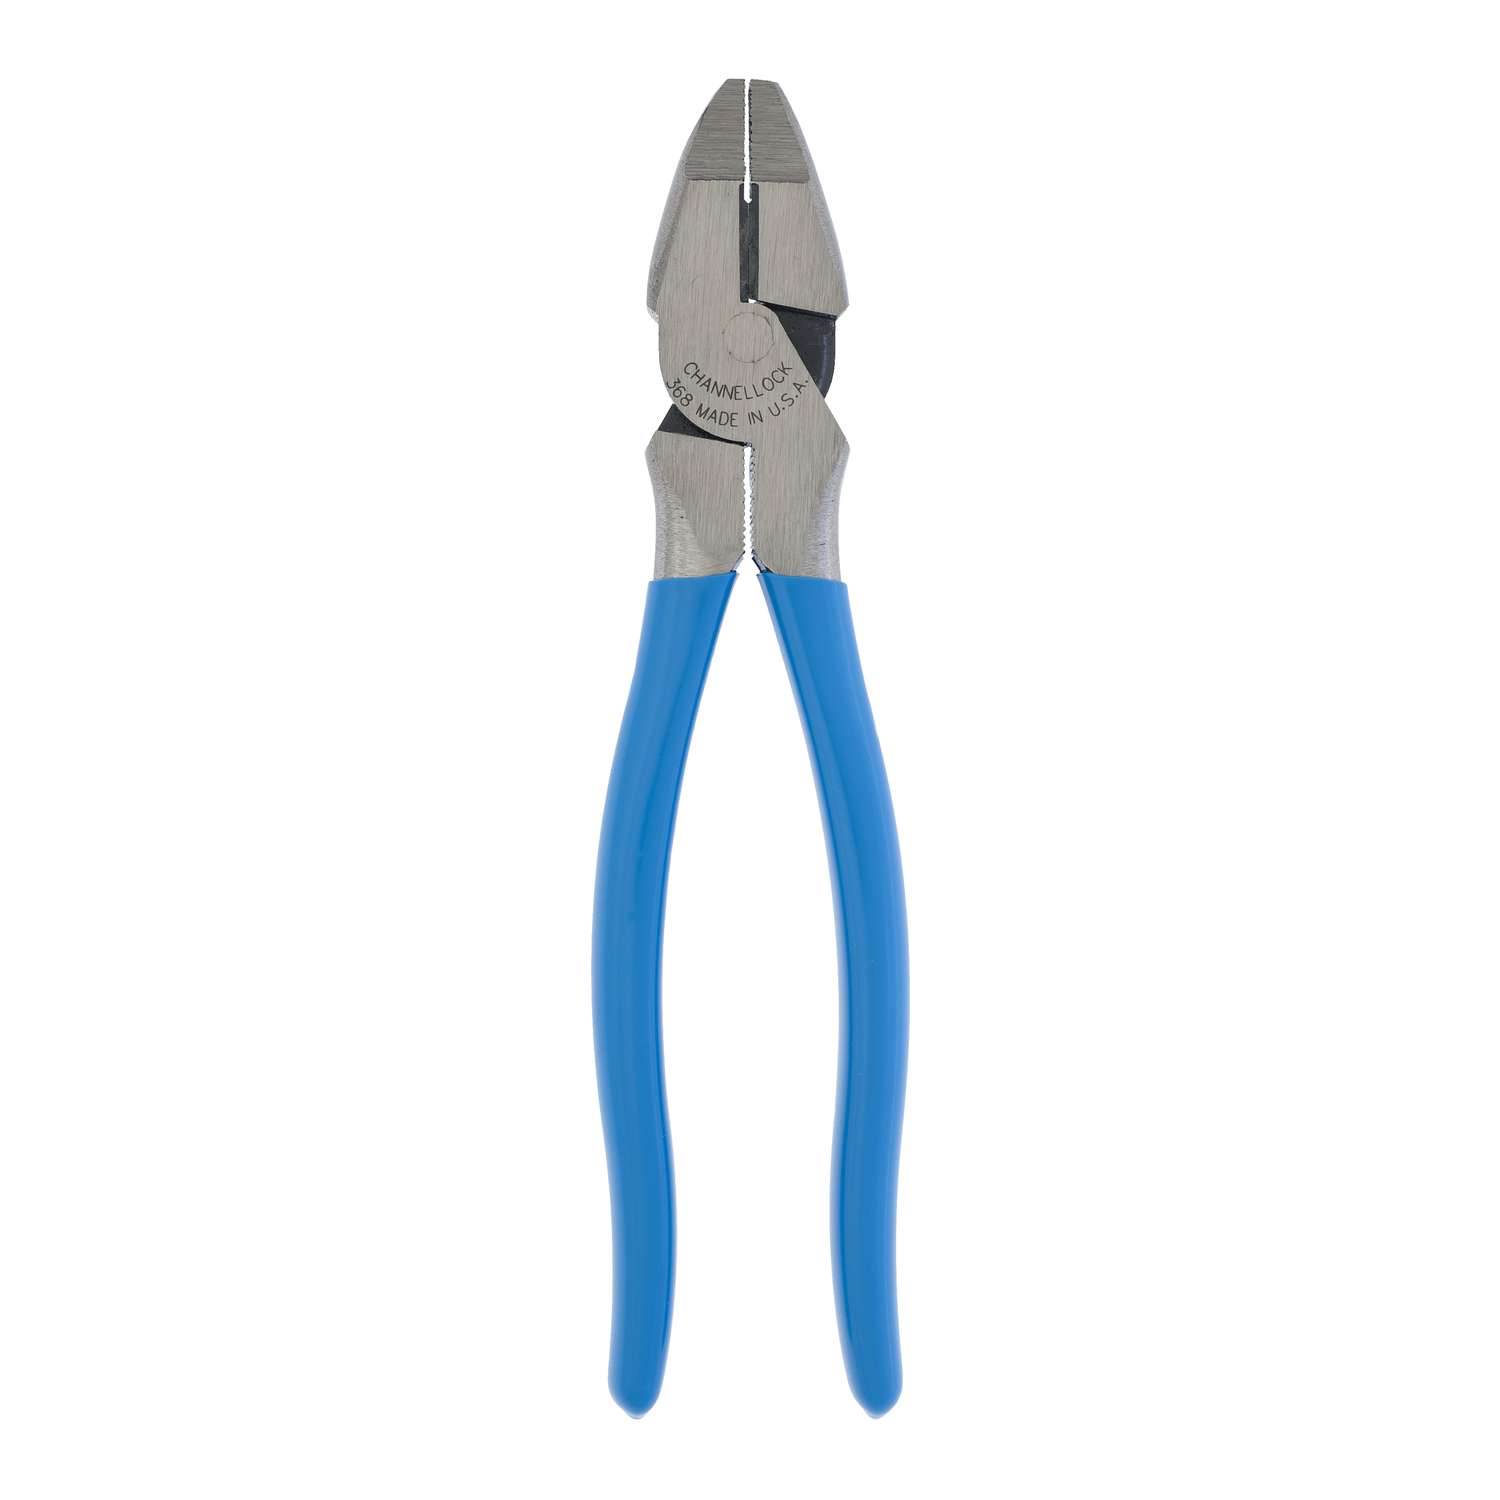 Brake Spring Pliers - NWS - The pliers with function, quality + design.